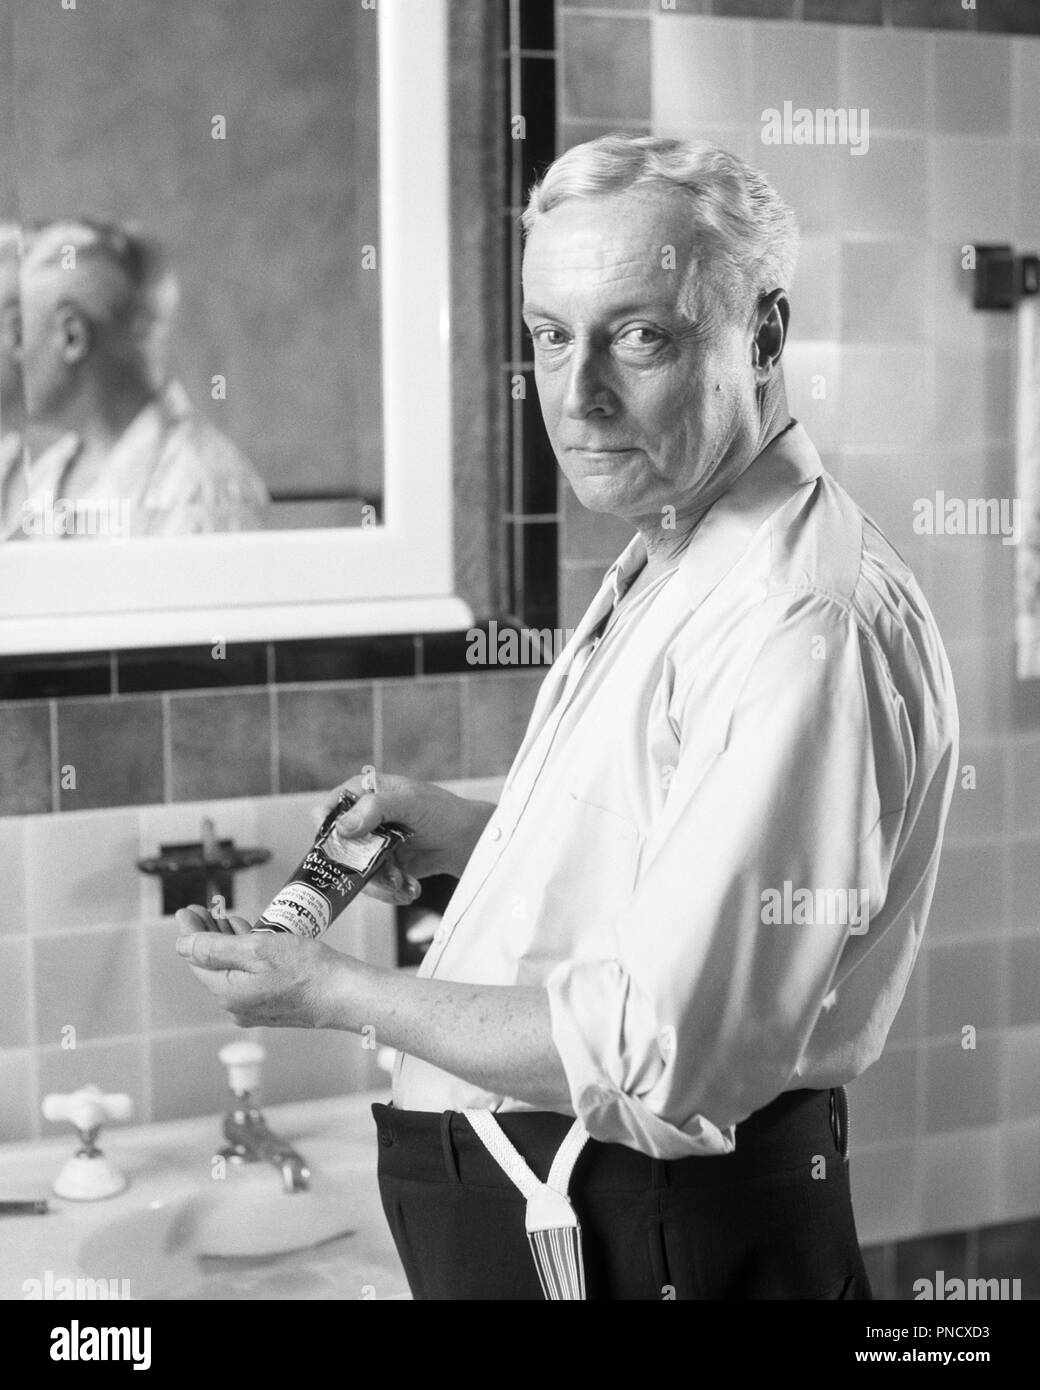 1920s SENIOR MAN STANDING IN SHIRT SLEEVES AT BATHROOM  SINK LOOKING AT CAMERA SQUEEZING GROOMING PRODUCT FROM TUBE INTO HAND   - b10305 HAR001 HARS EXPRESSIONS MIDDLE-AGED B&W MIDDLE-AGED MAN EYE CONTACT GROOMING BEFORE STARING OLDSTERS OLDSTER STRENGTH CHOICE KNOWLEDGE PRIDE AT IN INTO ELDERS SHIRT SLEEVES CONNECTION STARE STYLISH GRAY HAIR INTENSE PENETRATING SQUEEZING BLACK AND WHITE CAUCASIAN ETHNICITY HAR001 NEUTRAL OLD FASHIONED QUIZZICAL Stock Photo